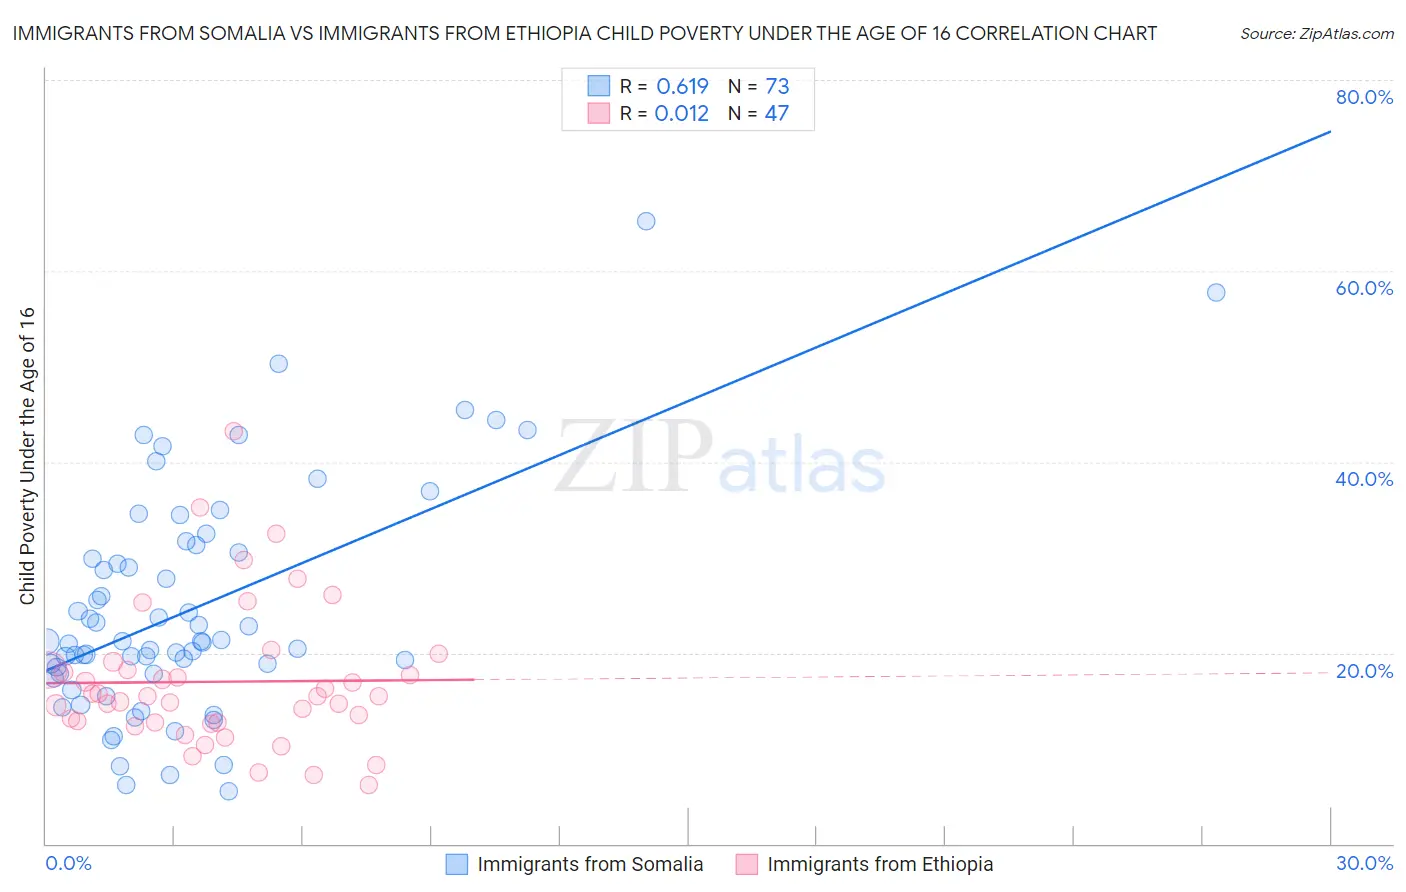 Immigrants from Somalia vs Immigrants from Ethiopia Child Poverty Under the Age of 16